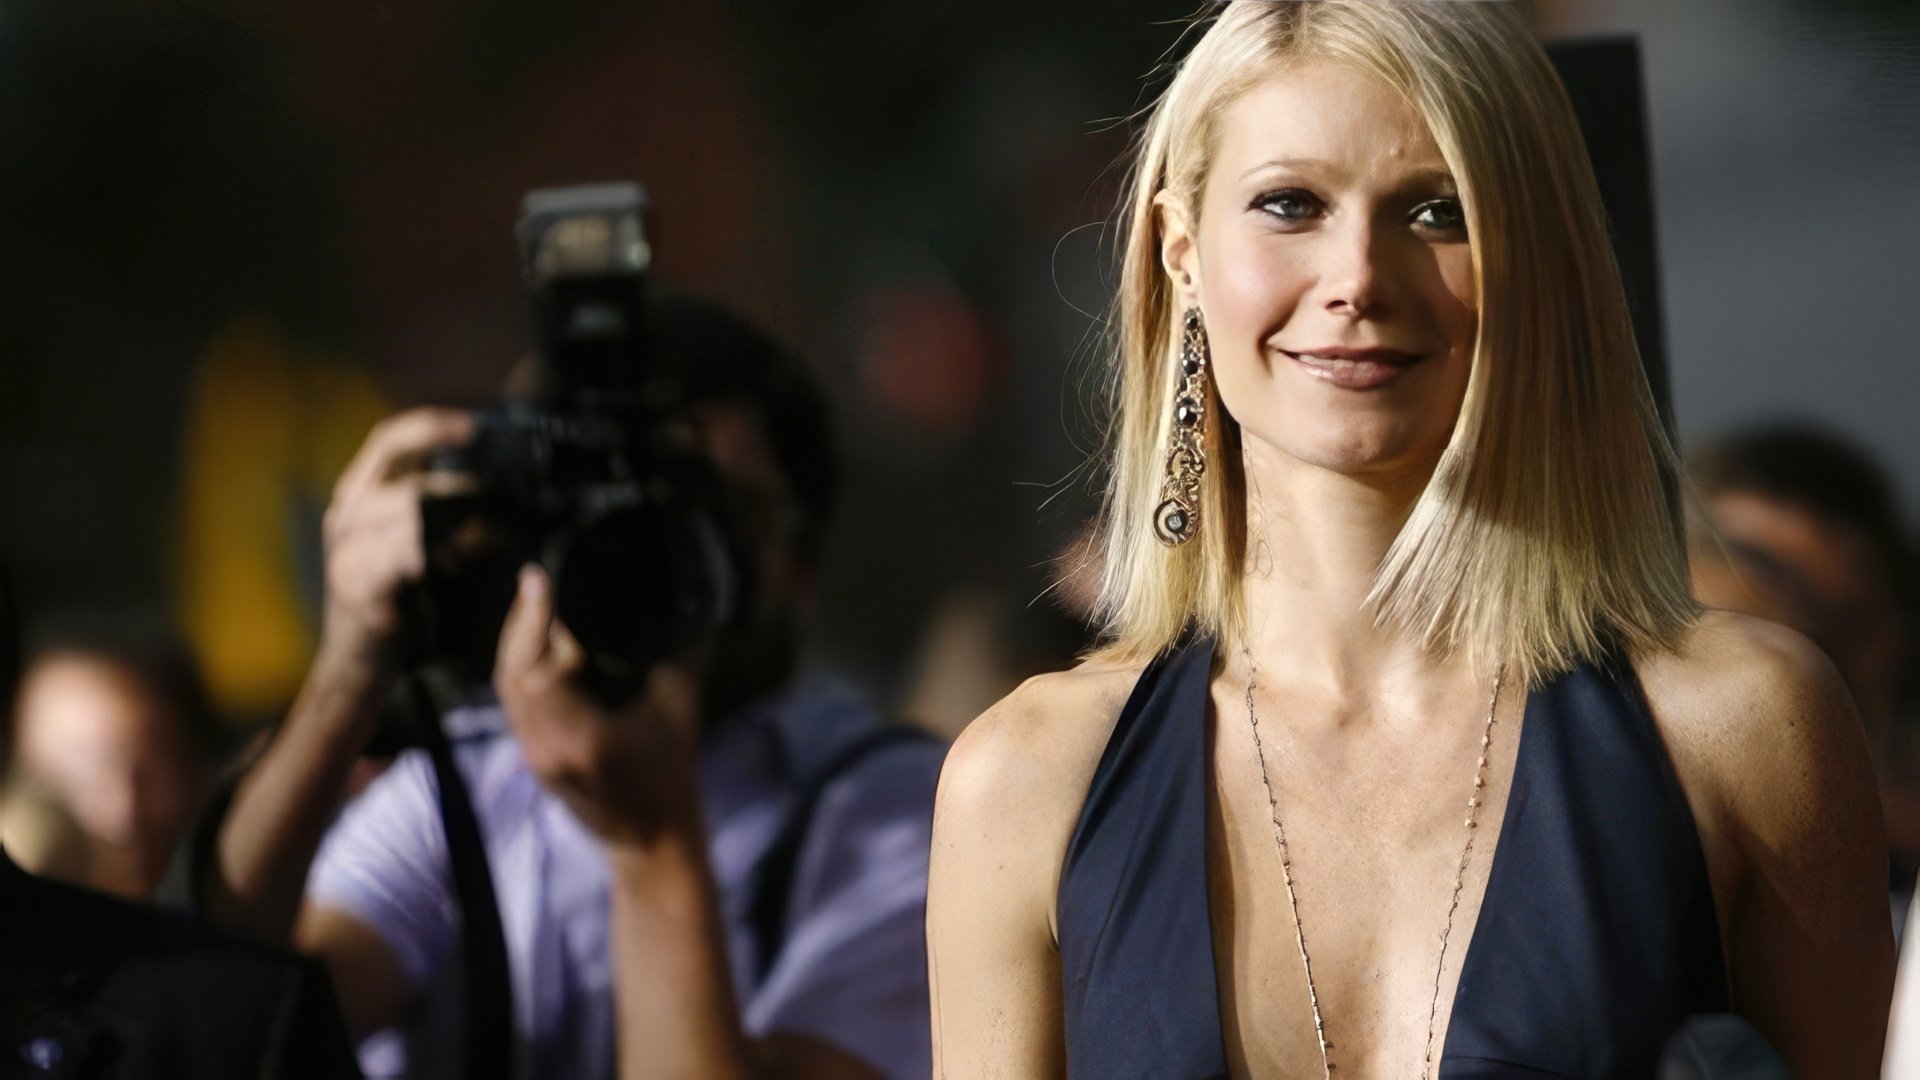 Gwyneth Paltrow ‒ the personification of success